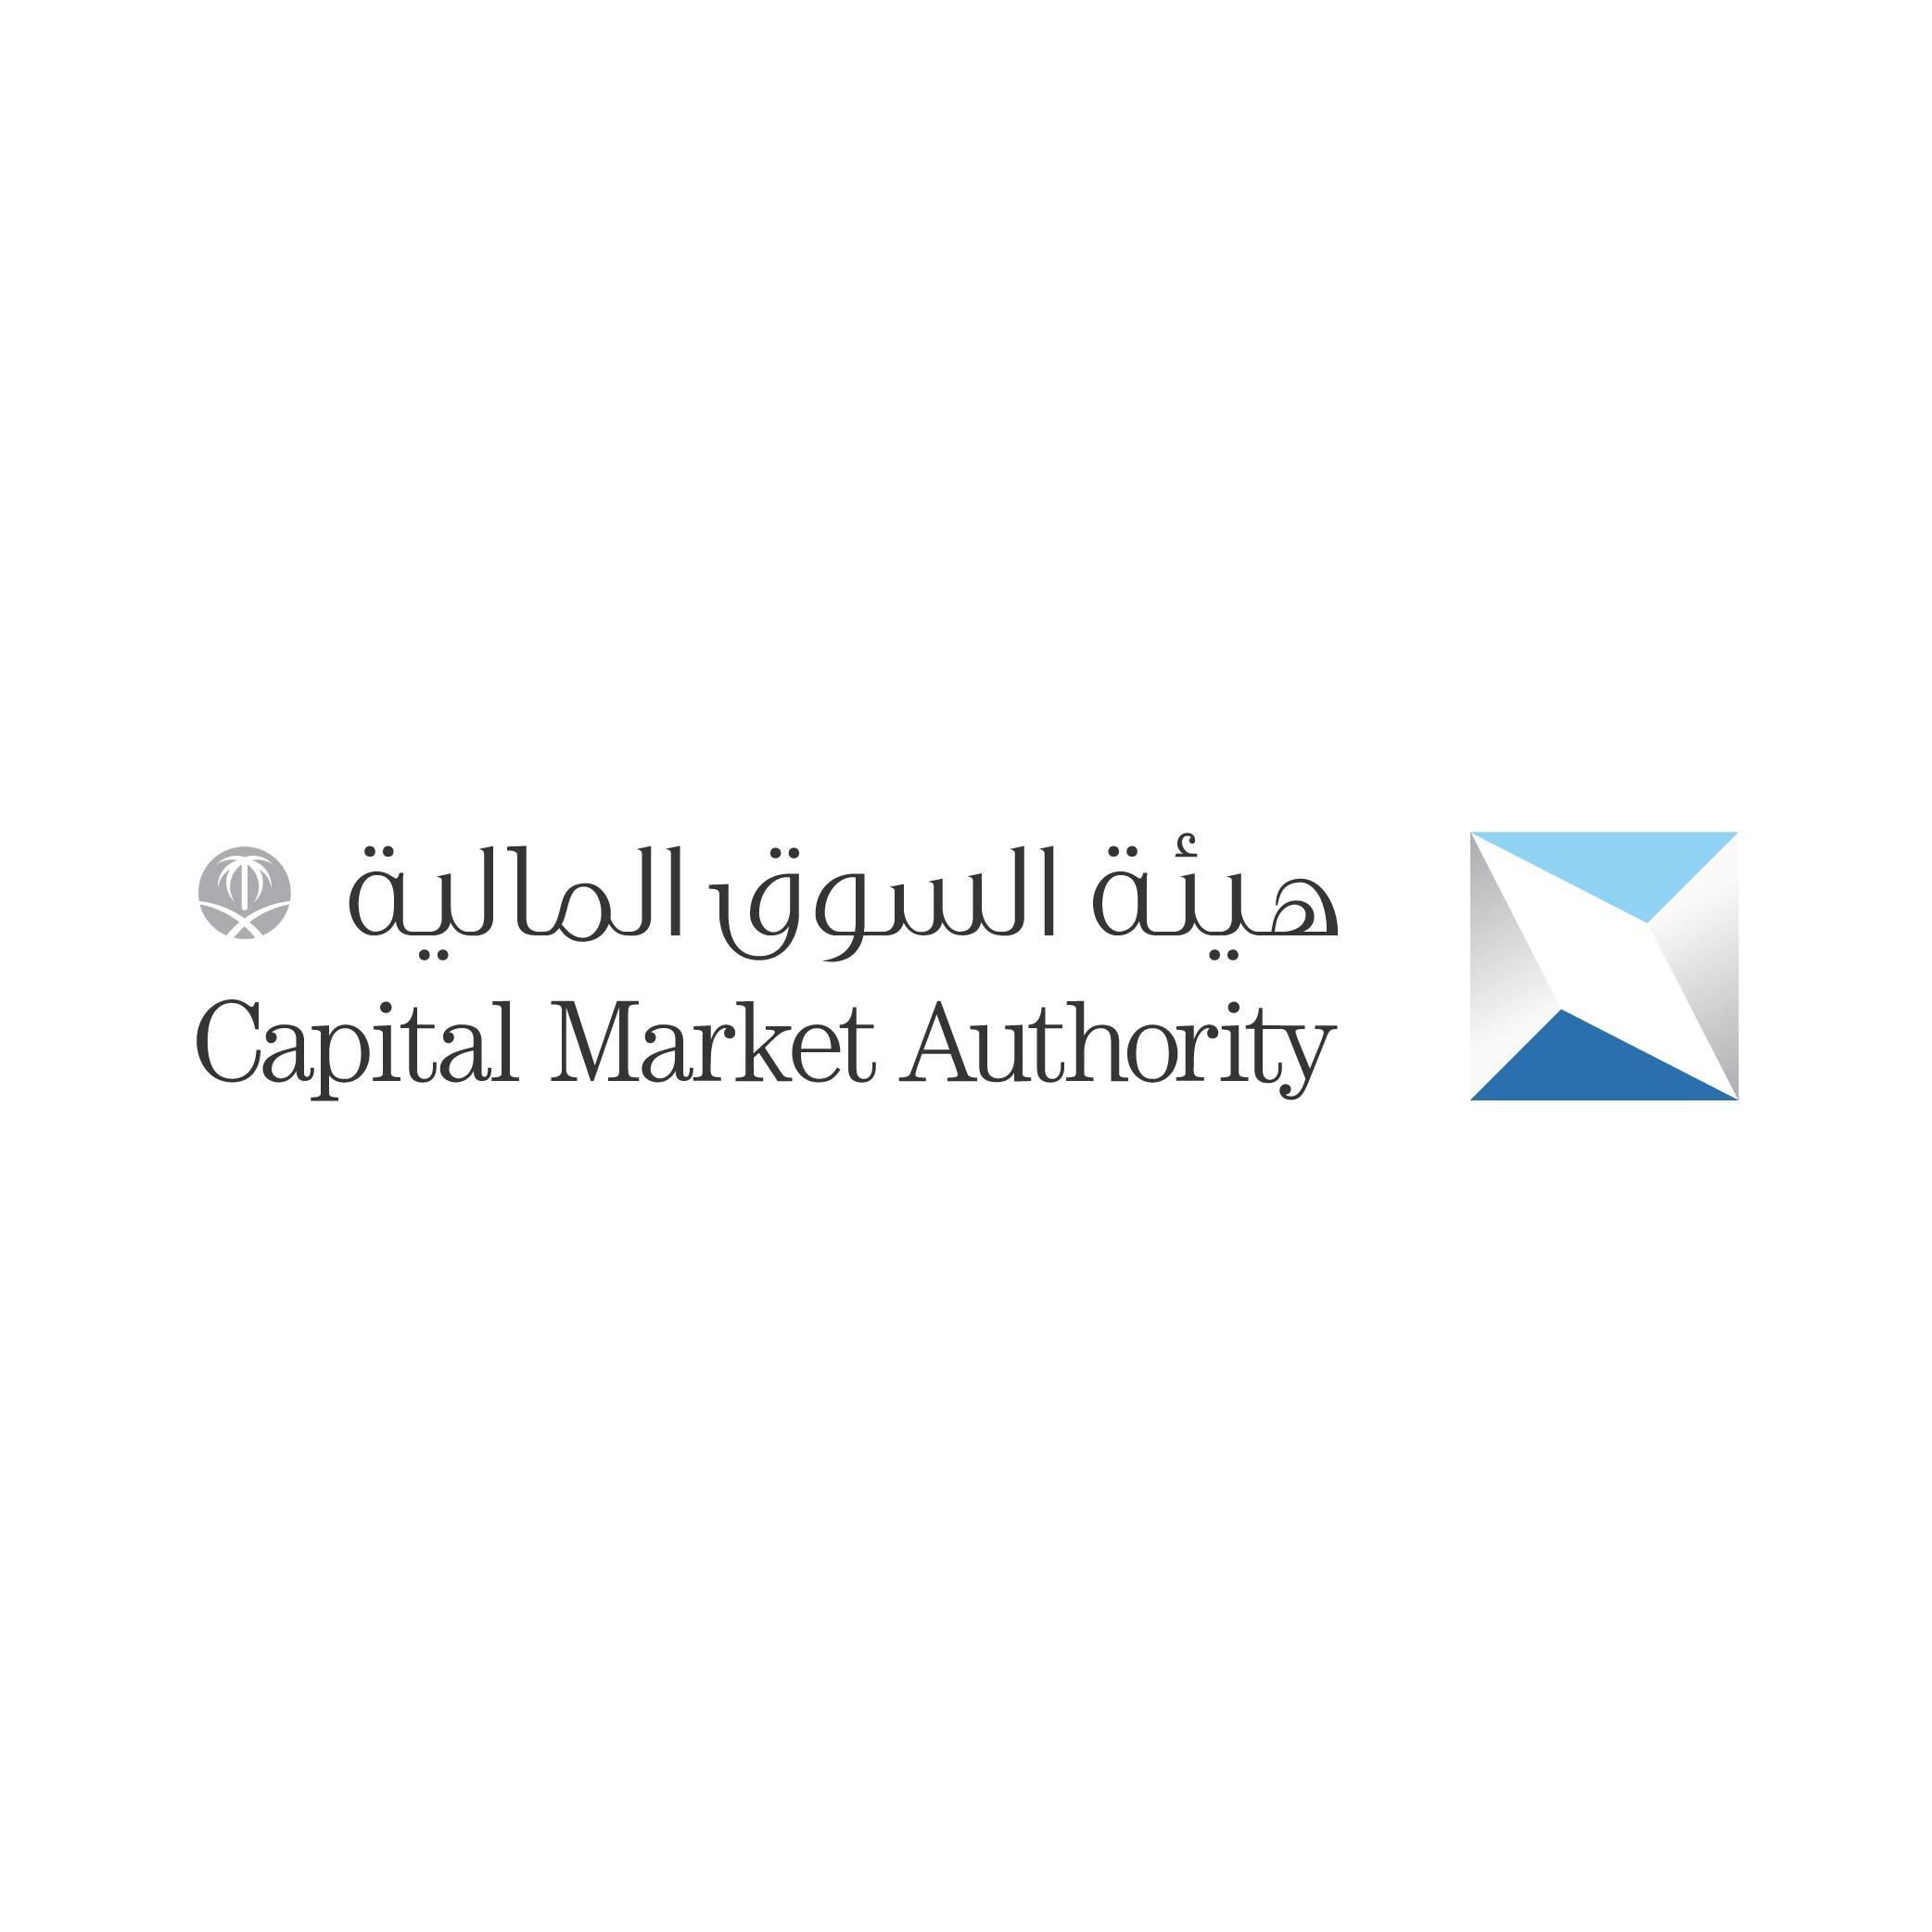 College of Business Students Visit the headquarters of Capital Market Authority (CMA) in Riyadh